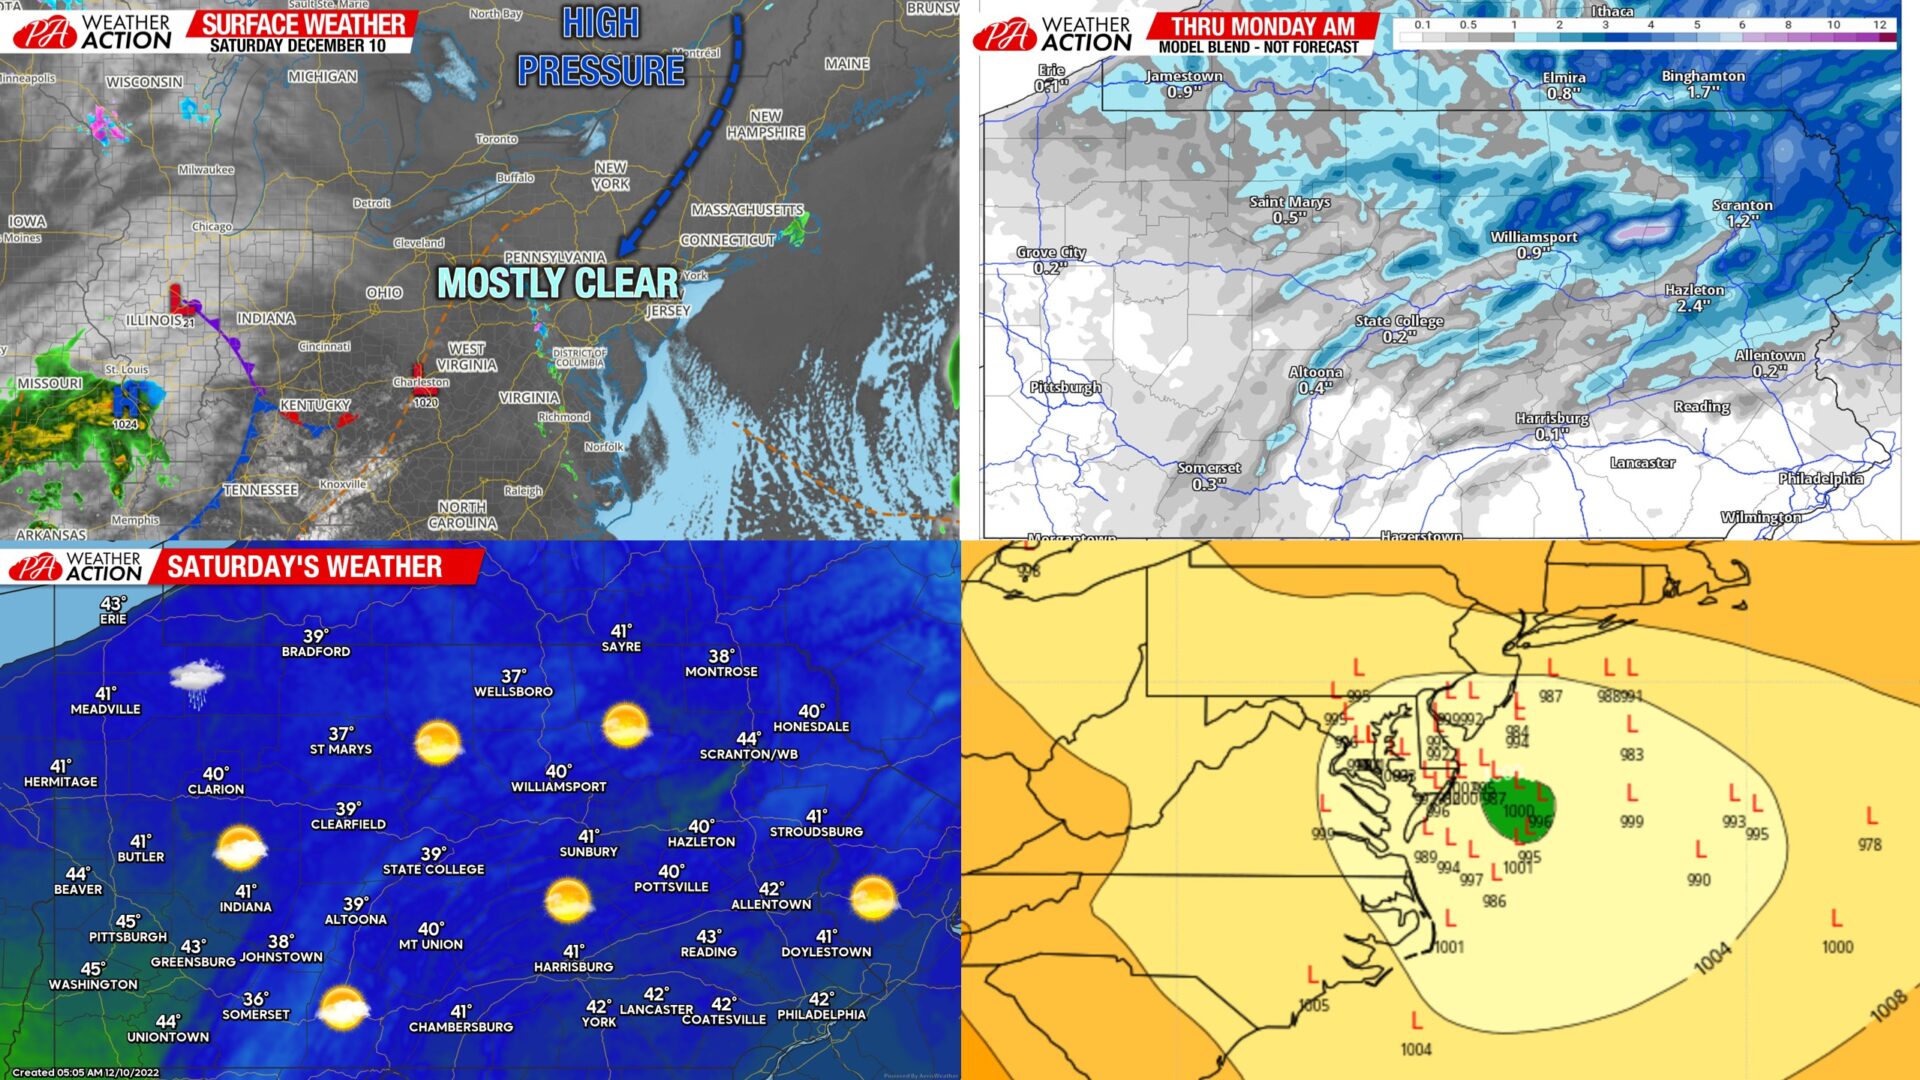 Saturday Dec 10 Report: Increasing Clouds Ahead of Sunday’s Light Impact Event; Larger Potential Looming Thursday – Friday